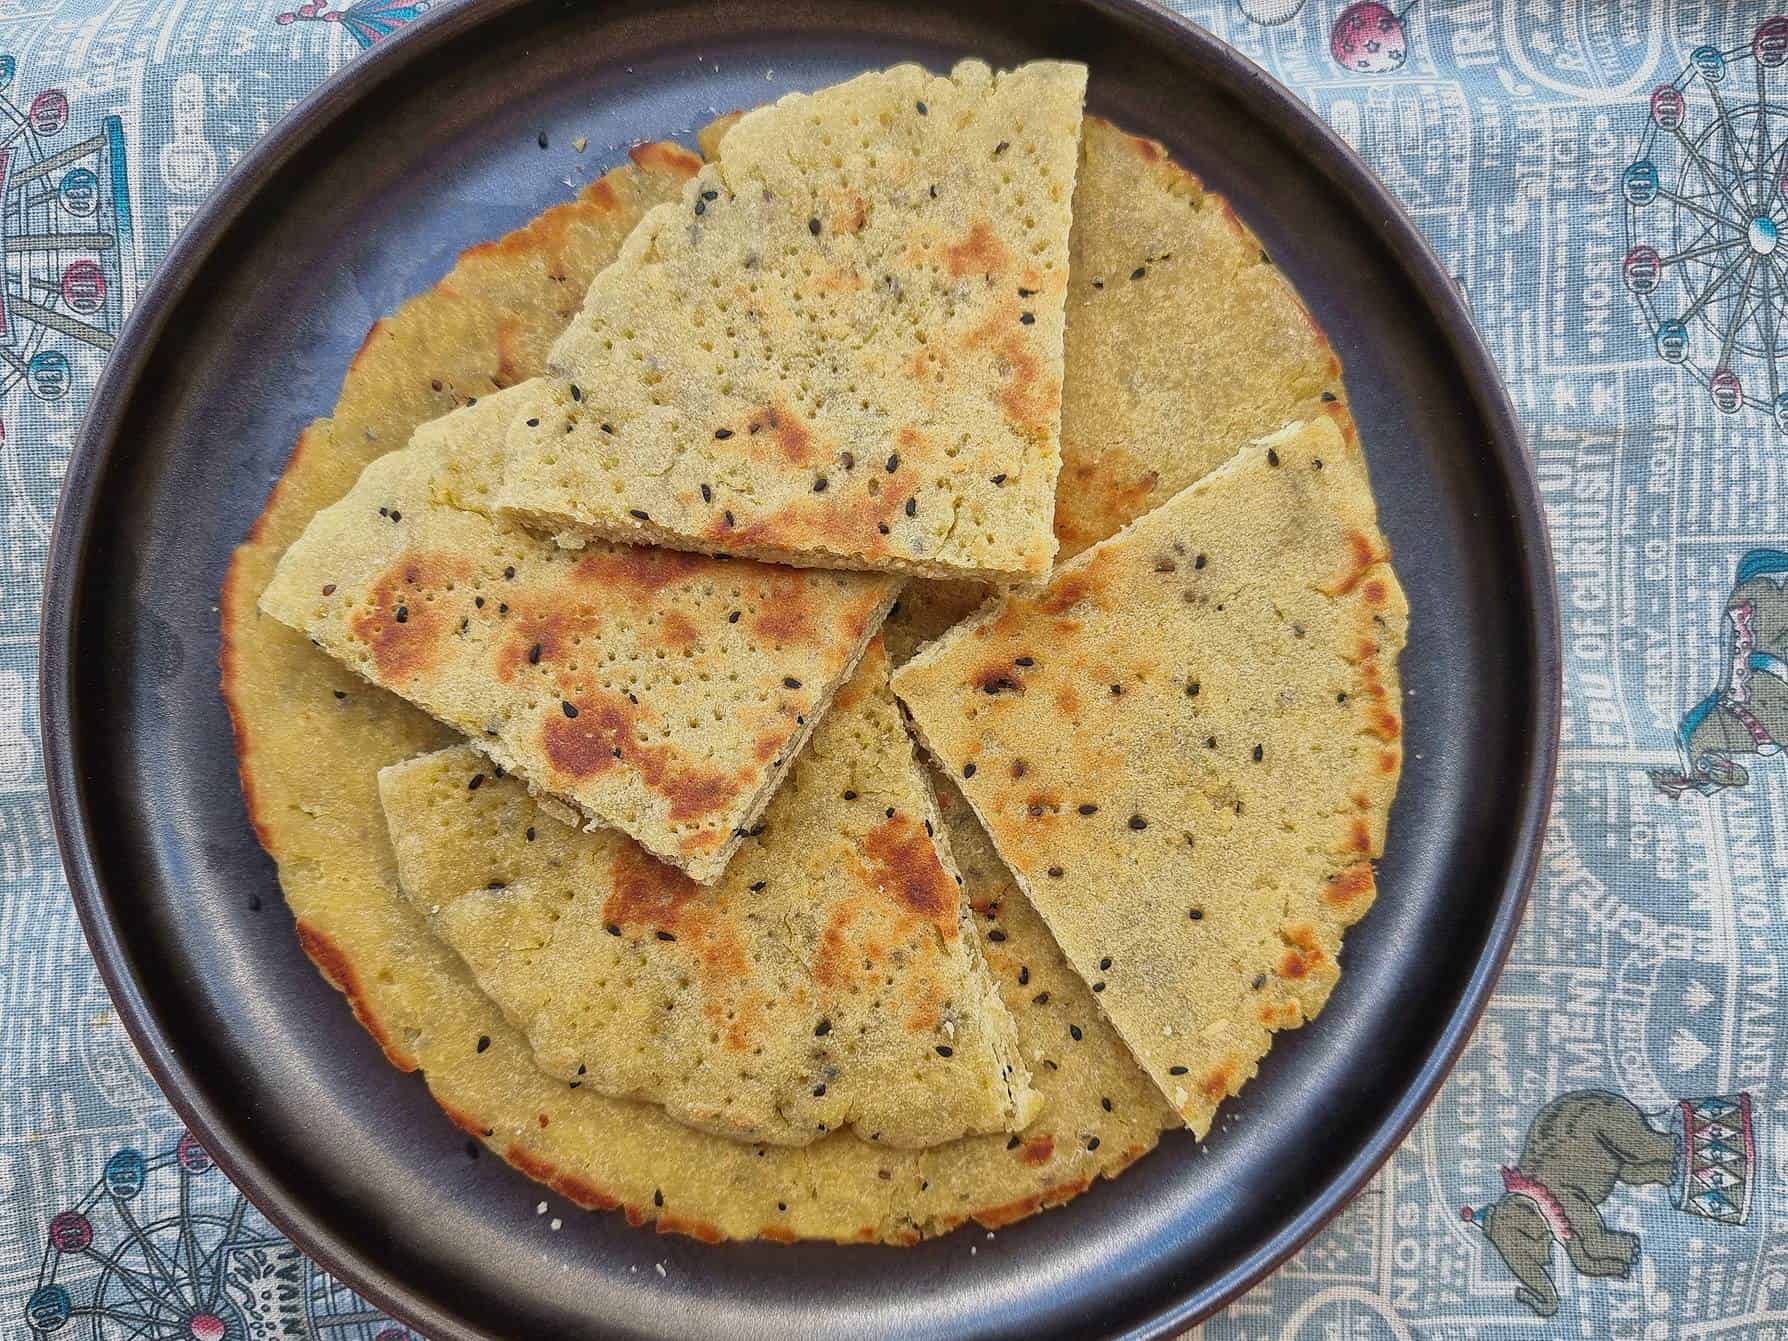 Algerian flatbread kesra with 4 pieces served on a plate